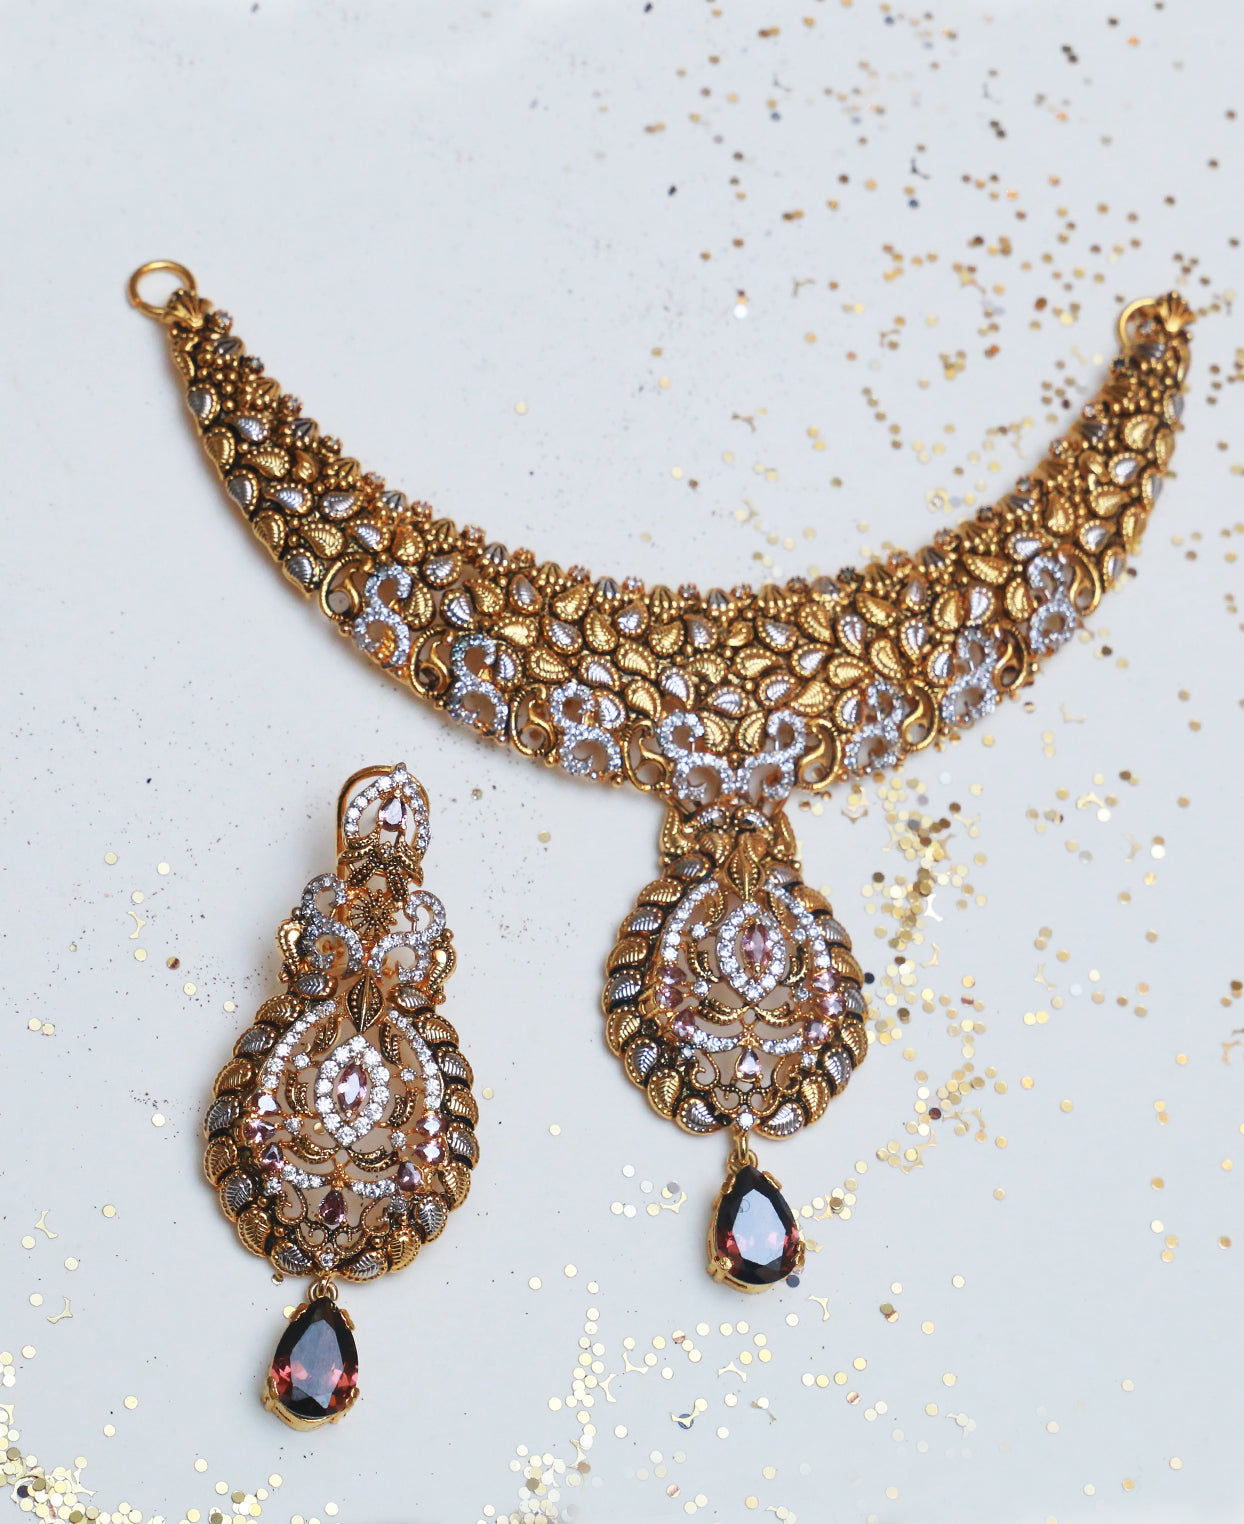 The Intricate Gold Set